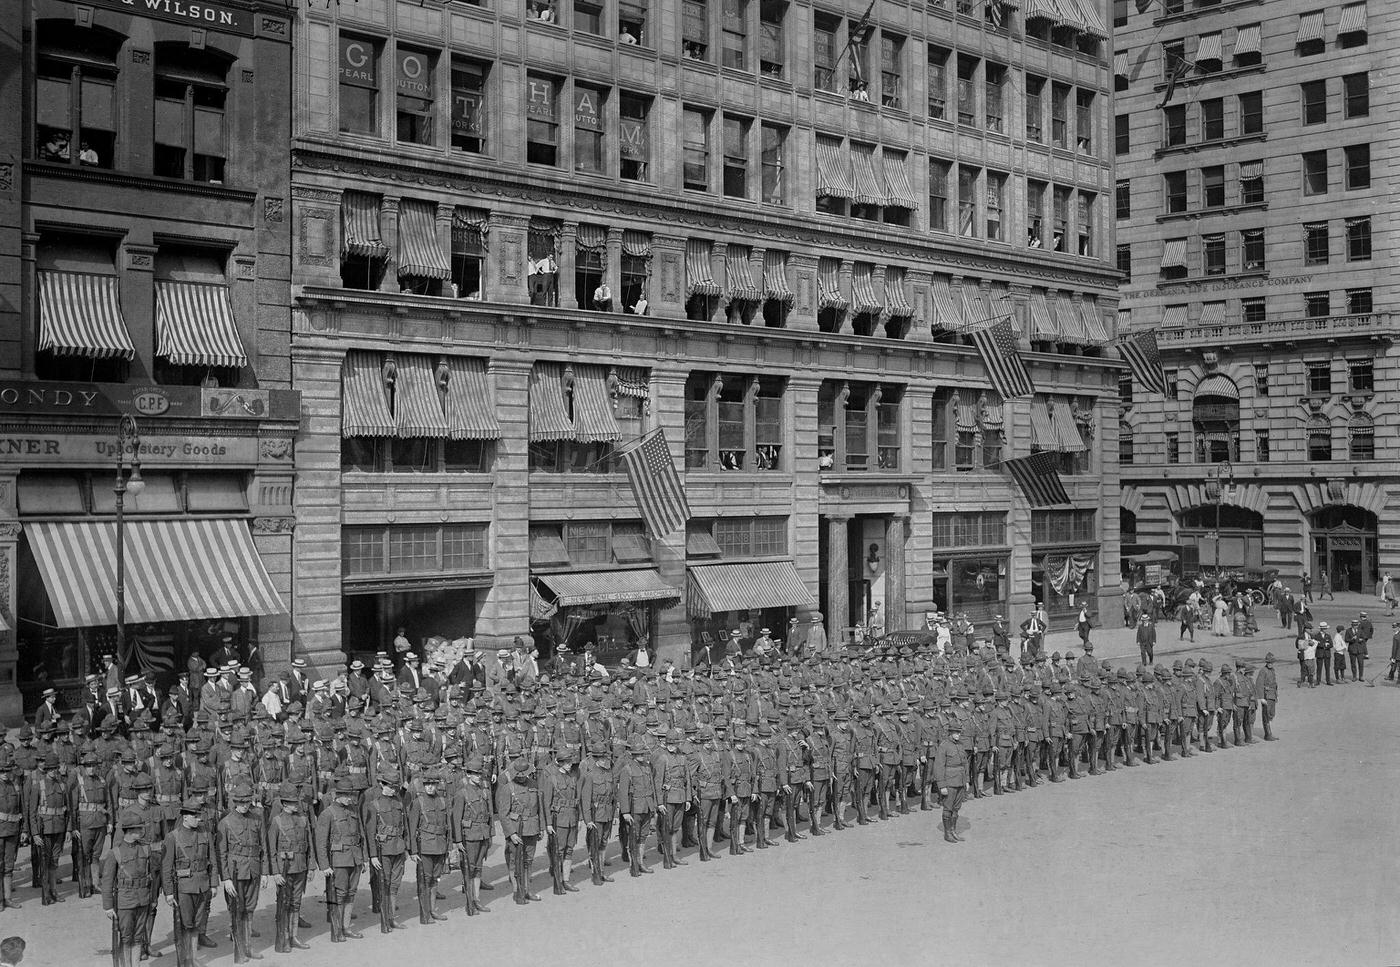 U.s. Army Coast Artillery Members In Front Of Everett Building, Union Square, New York City, 1915